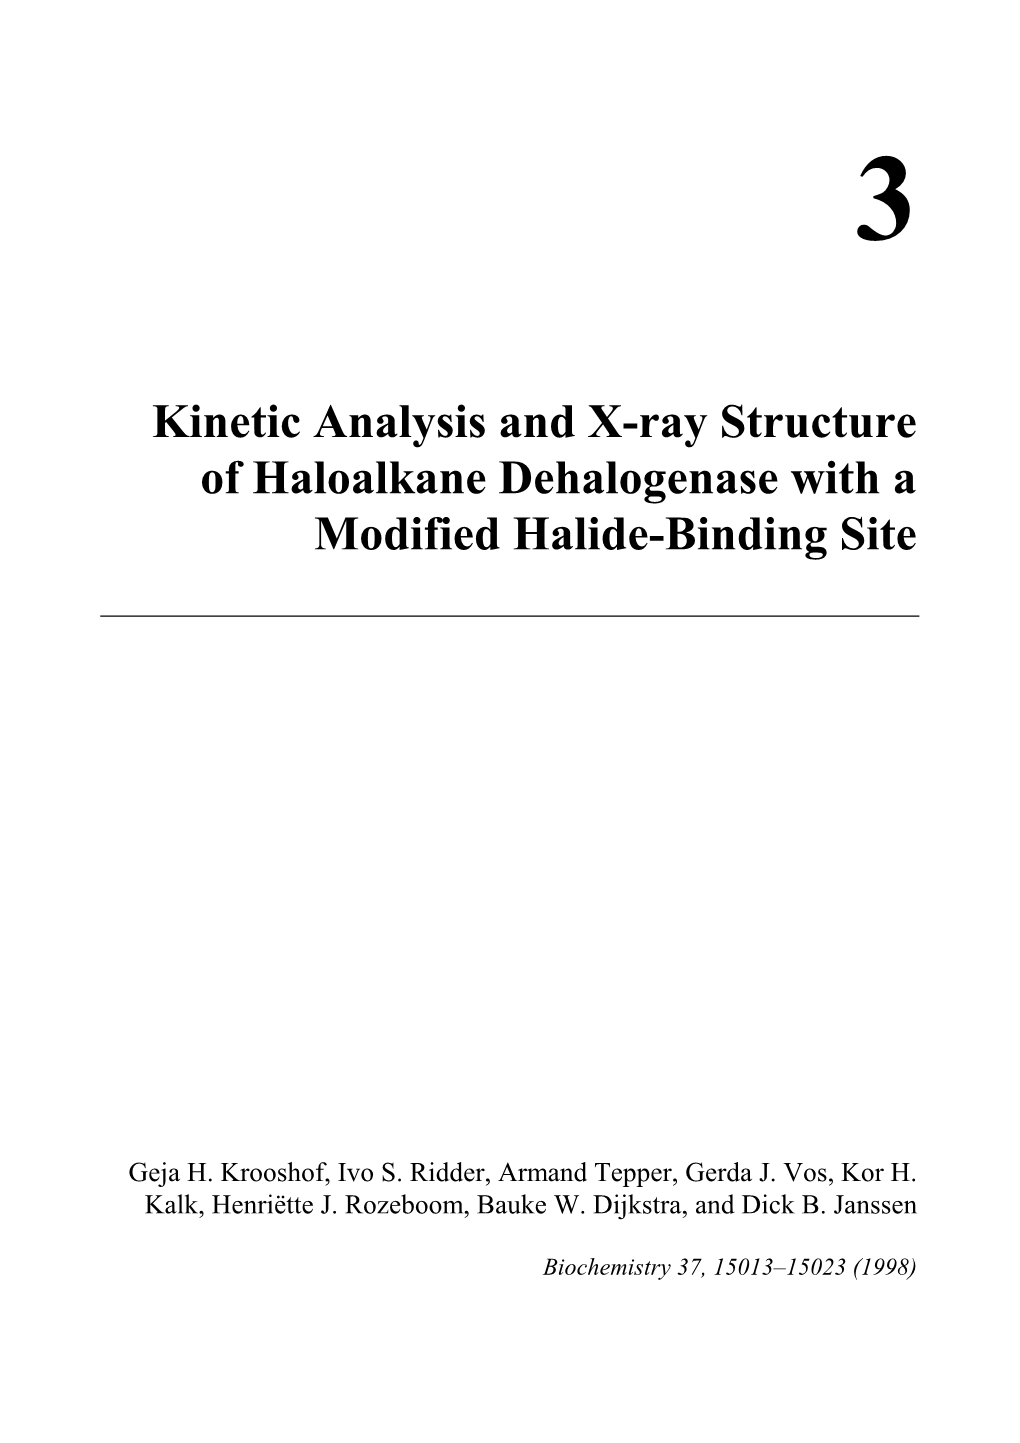 Kinetic Analysis and X-Ray Structure of Haloalkane Dehalogenase with a Modified Halide-Binding Site